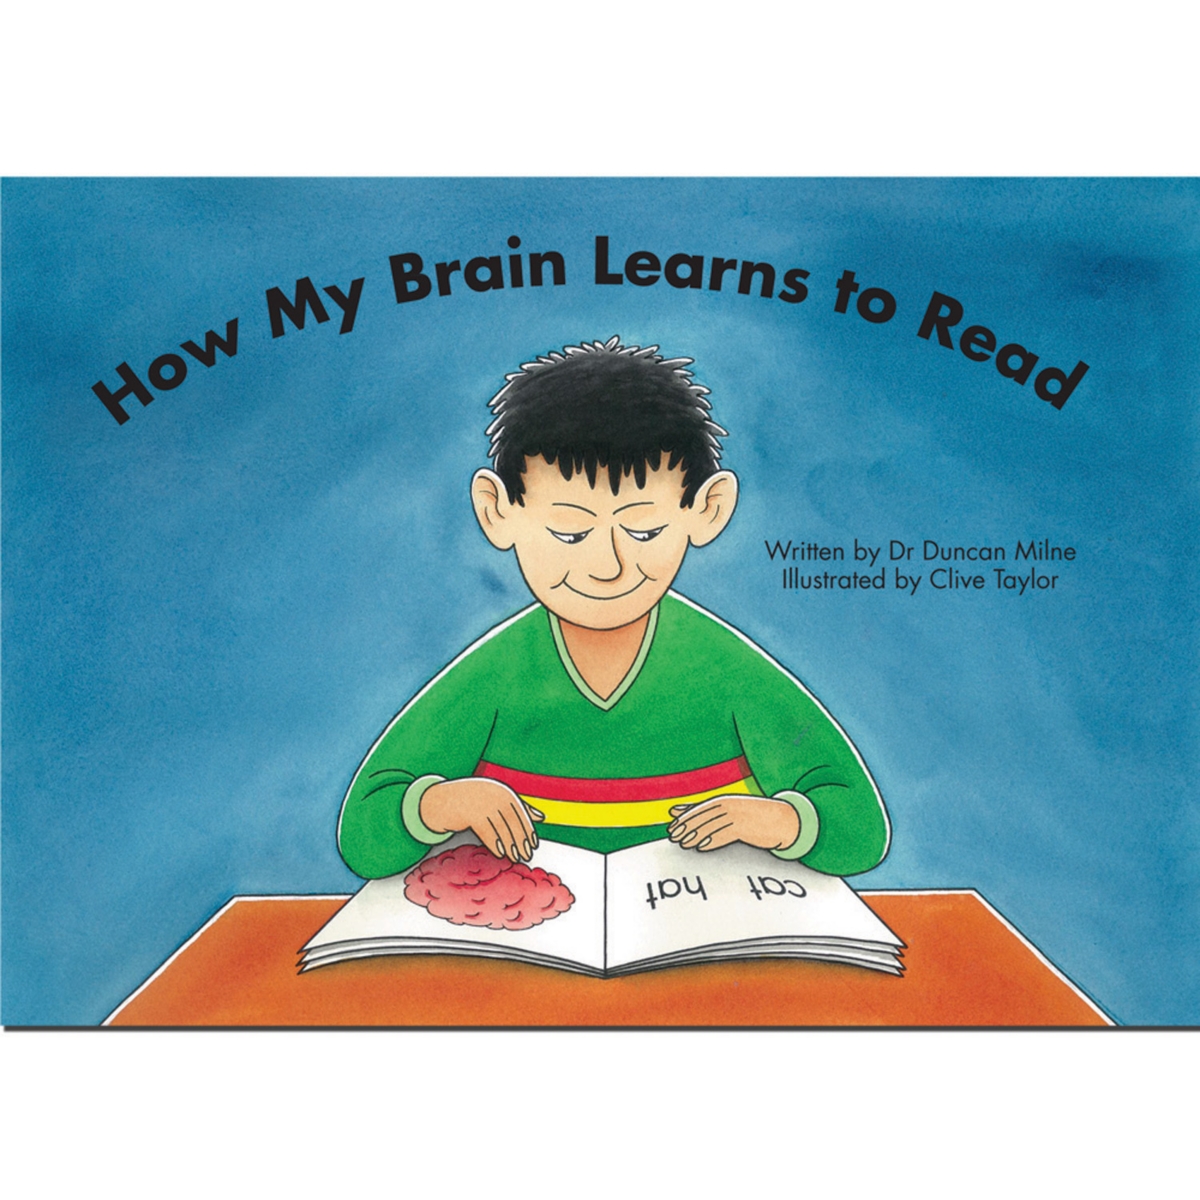 ISBN 9780989058629 product image for Junior Learning How My Brain Learns to Read Childrens Book | upcitemdb.com